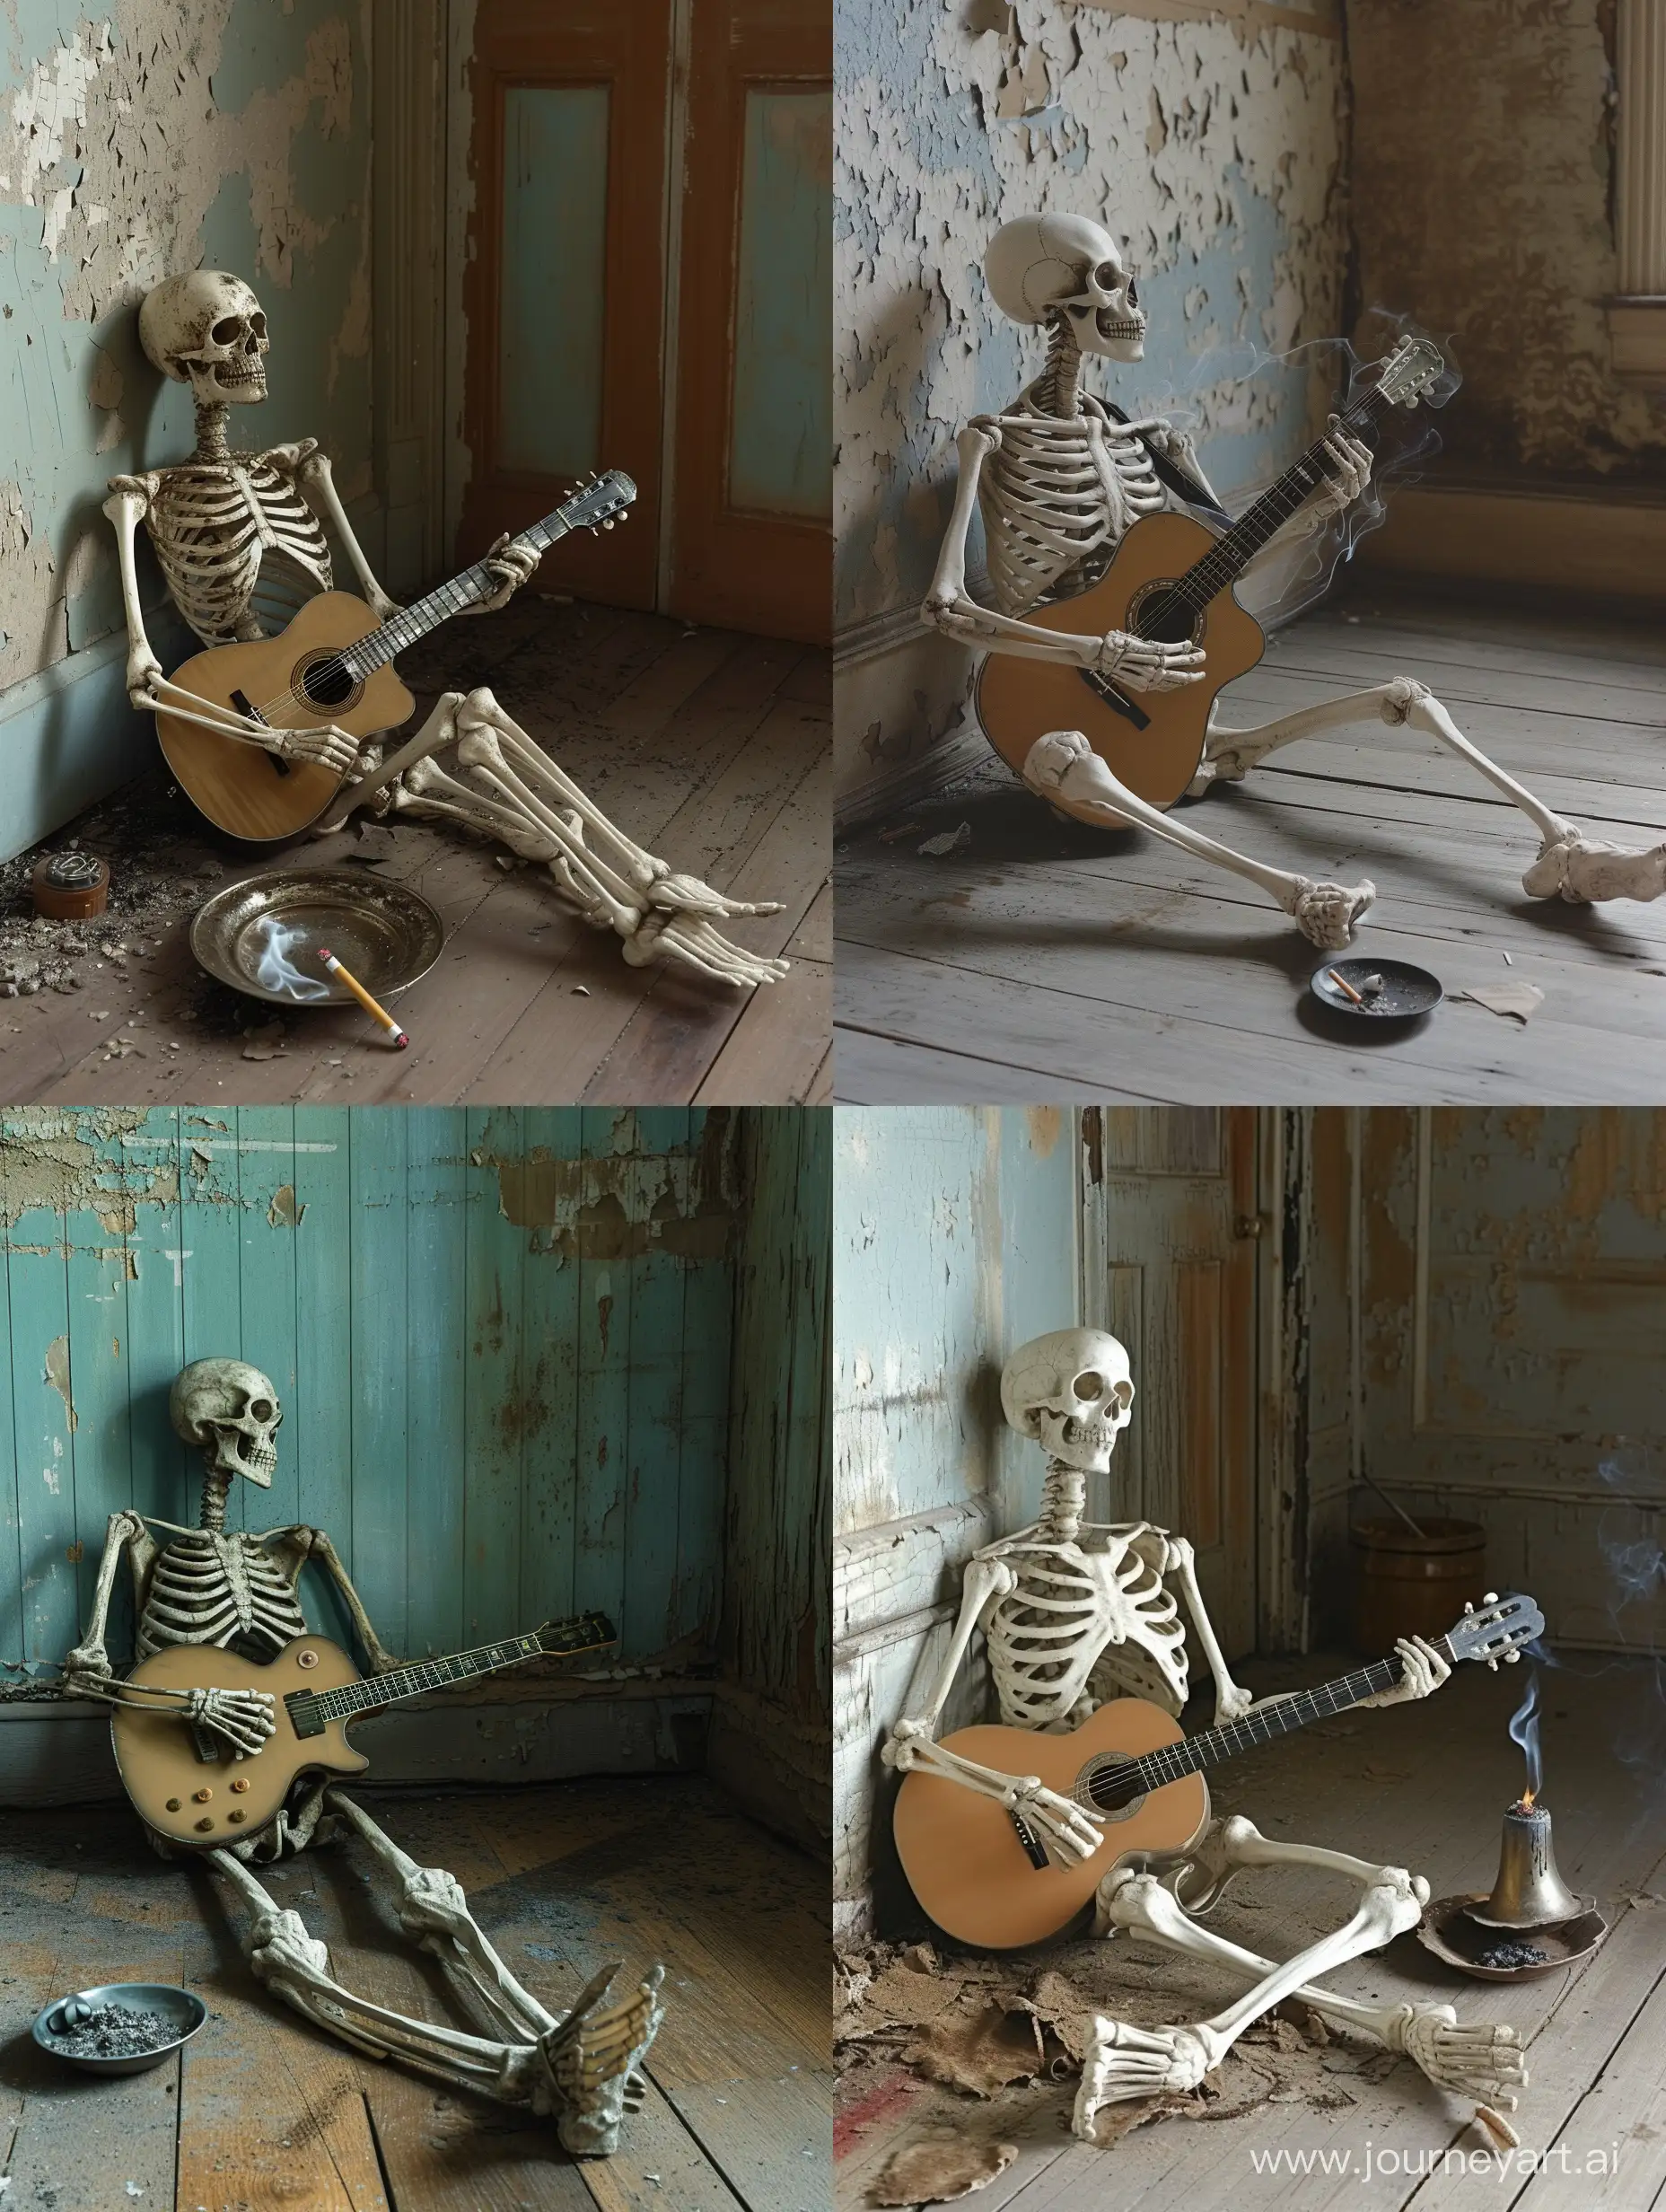 A saturated photo of a skeletal figure,
sitting on the worn-out floor of a run-down house.

The walls and wooden floor bear traces of old paint,
most of it chipped off, revealing the passage of time.

Legs crossed Indian style,
the skeletal figure exudes a grunge aesthetic,
wearing clothes that reflect the rebellious spirit of the era.

In his bony fingers, he holds a guitar,
strumming the strings with an ethereal melody,
filling the dilapidated space with haunting music.

Beside him, an ashtray holds a burning cigarette,
its smoke intertwining with the air,
creating an atmosphere of nostalgia and introspection.

This image captures the essence of raw emotions,
the juxtaposition of decay and creativity,
inviting viewers into the world of forgotten dreams,
where music serves as a balm for the weary soul.

Unlikely collaborators:
Kurt Cobain, the iconic grunge musician,
David Lynch, the filmmaker known for surreal and atmospheric storytelling,
Anton Corbijn, the photographer capturing the essence of music and subcultures,
Sarah Burton, the fashion designer blending darkness and romanticism,
Tarsem Singh, the director known for his visually stunning and symbolic films. 